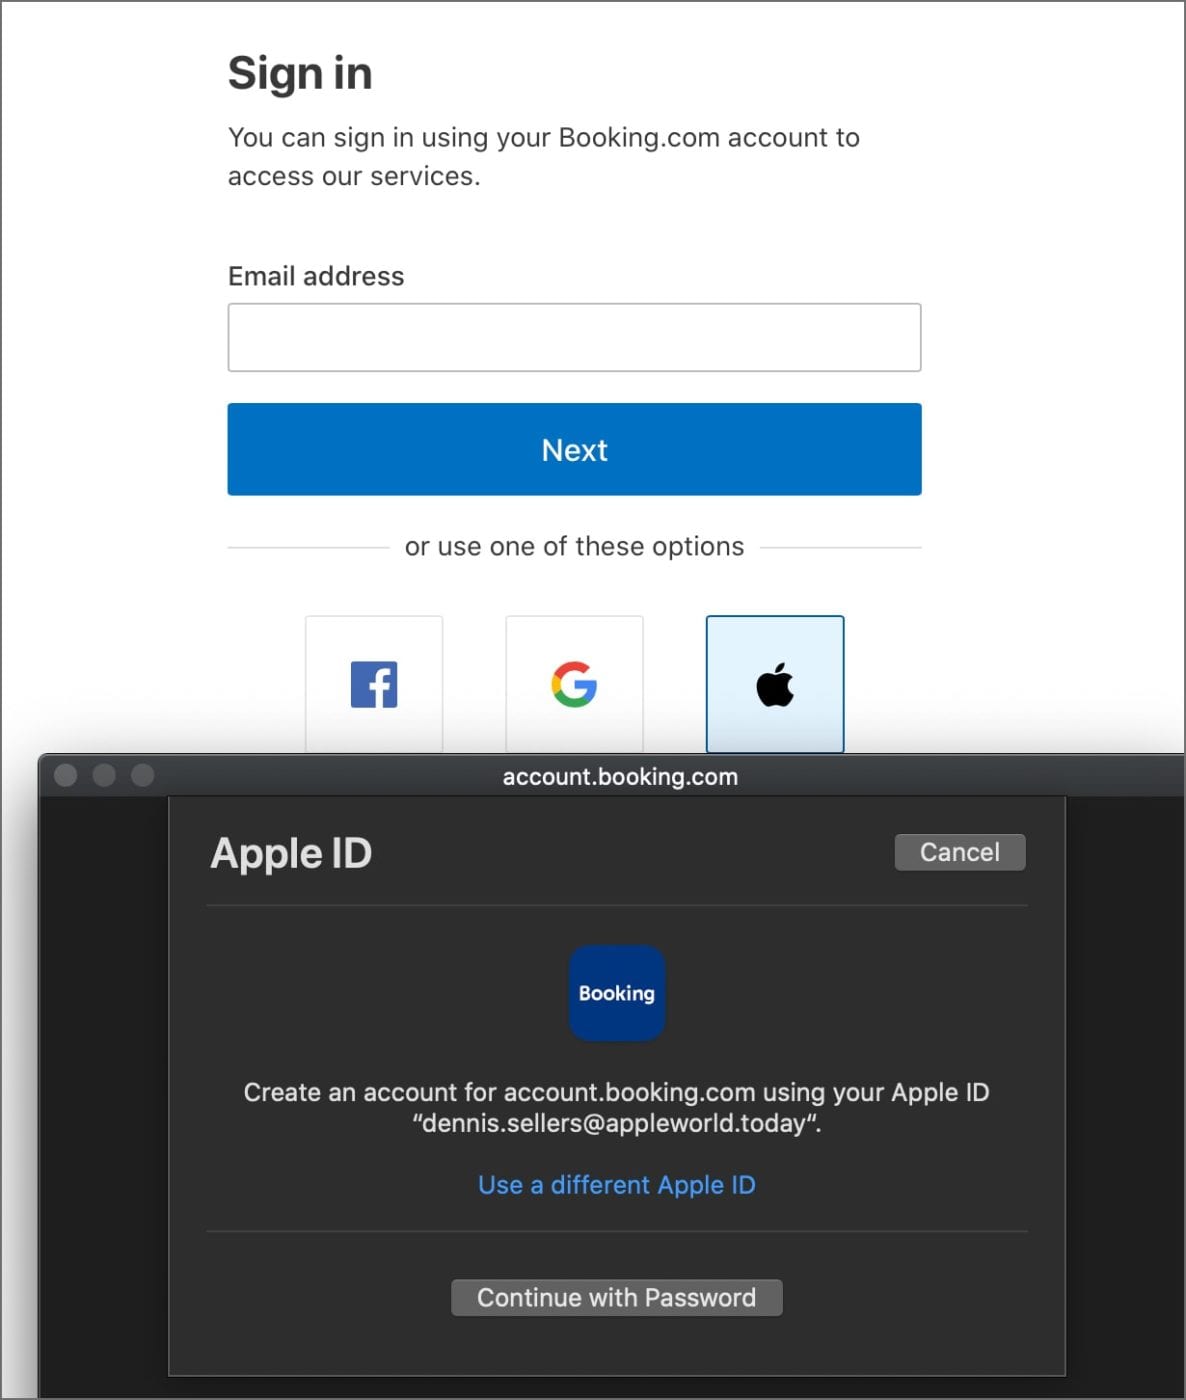 Screenshot showing Sign in with Apple ID on Booking.com